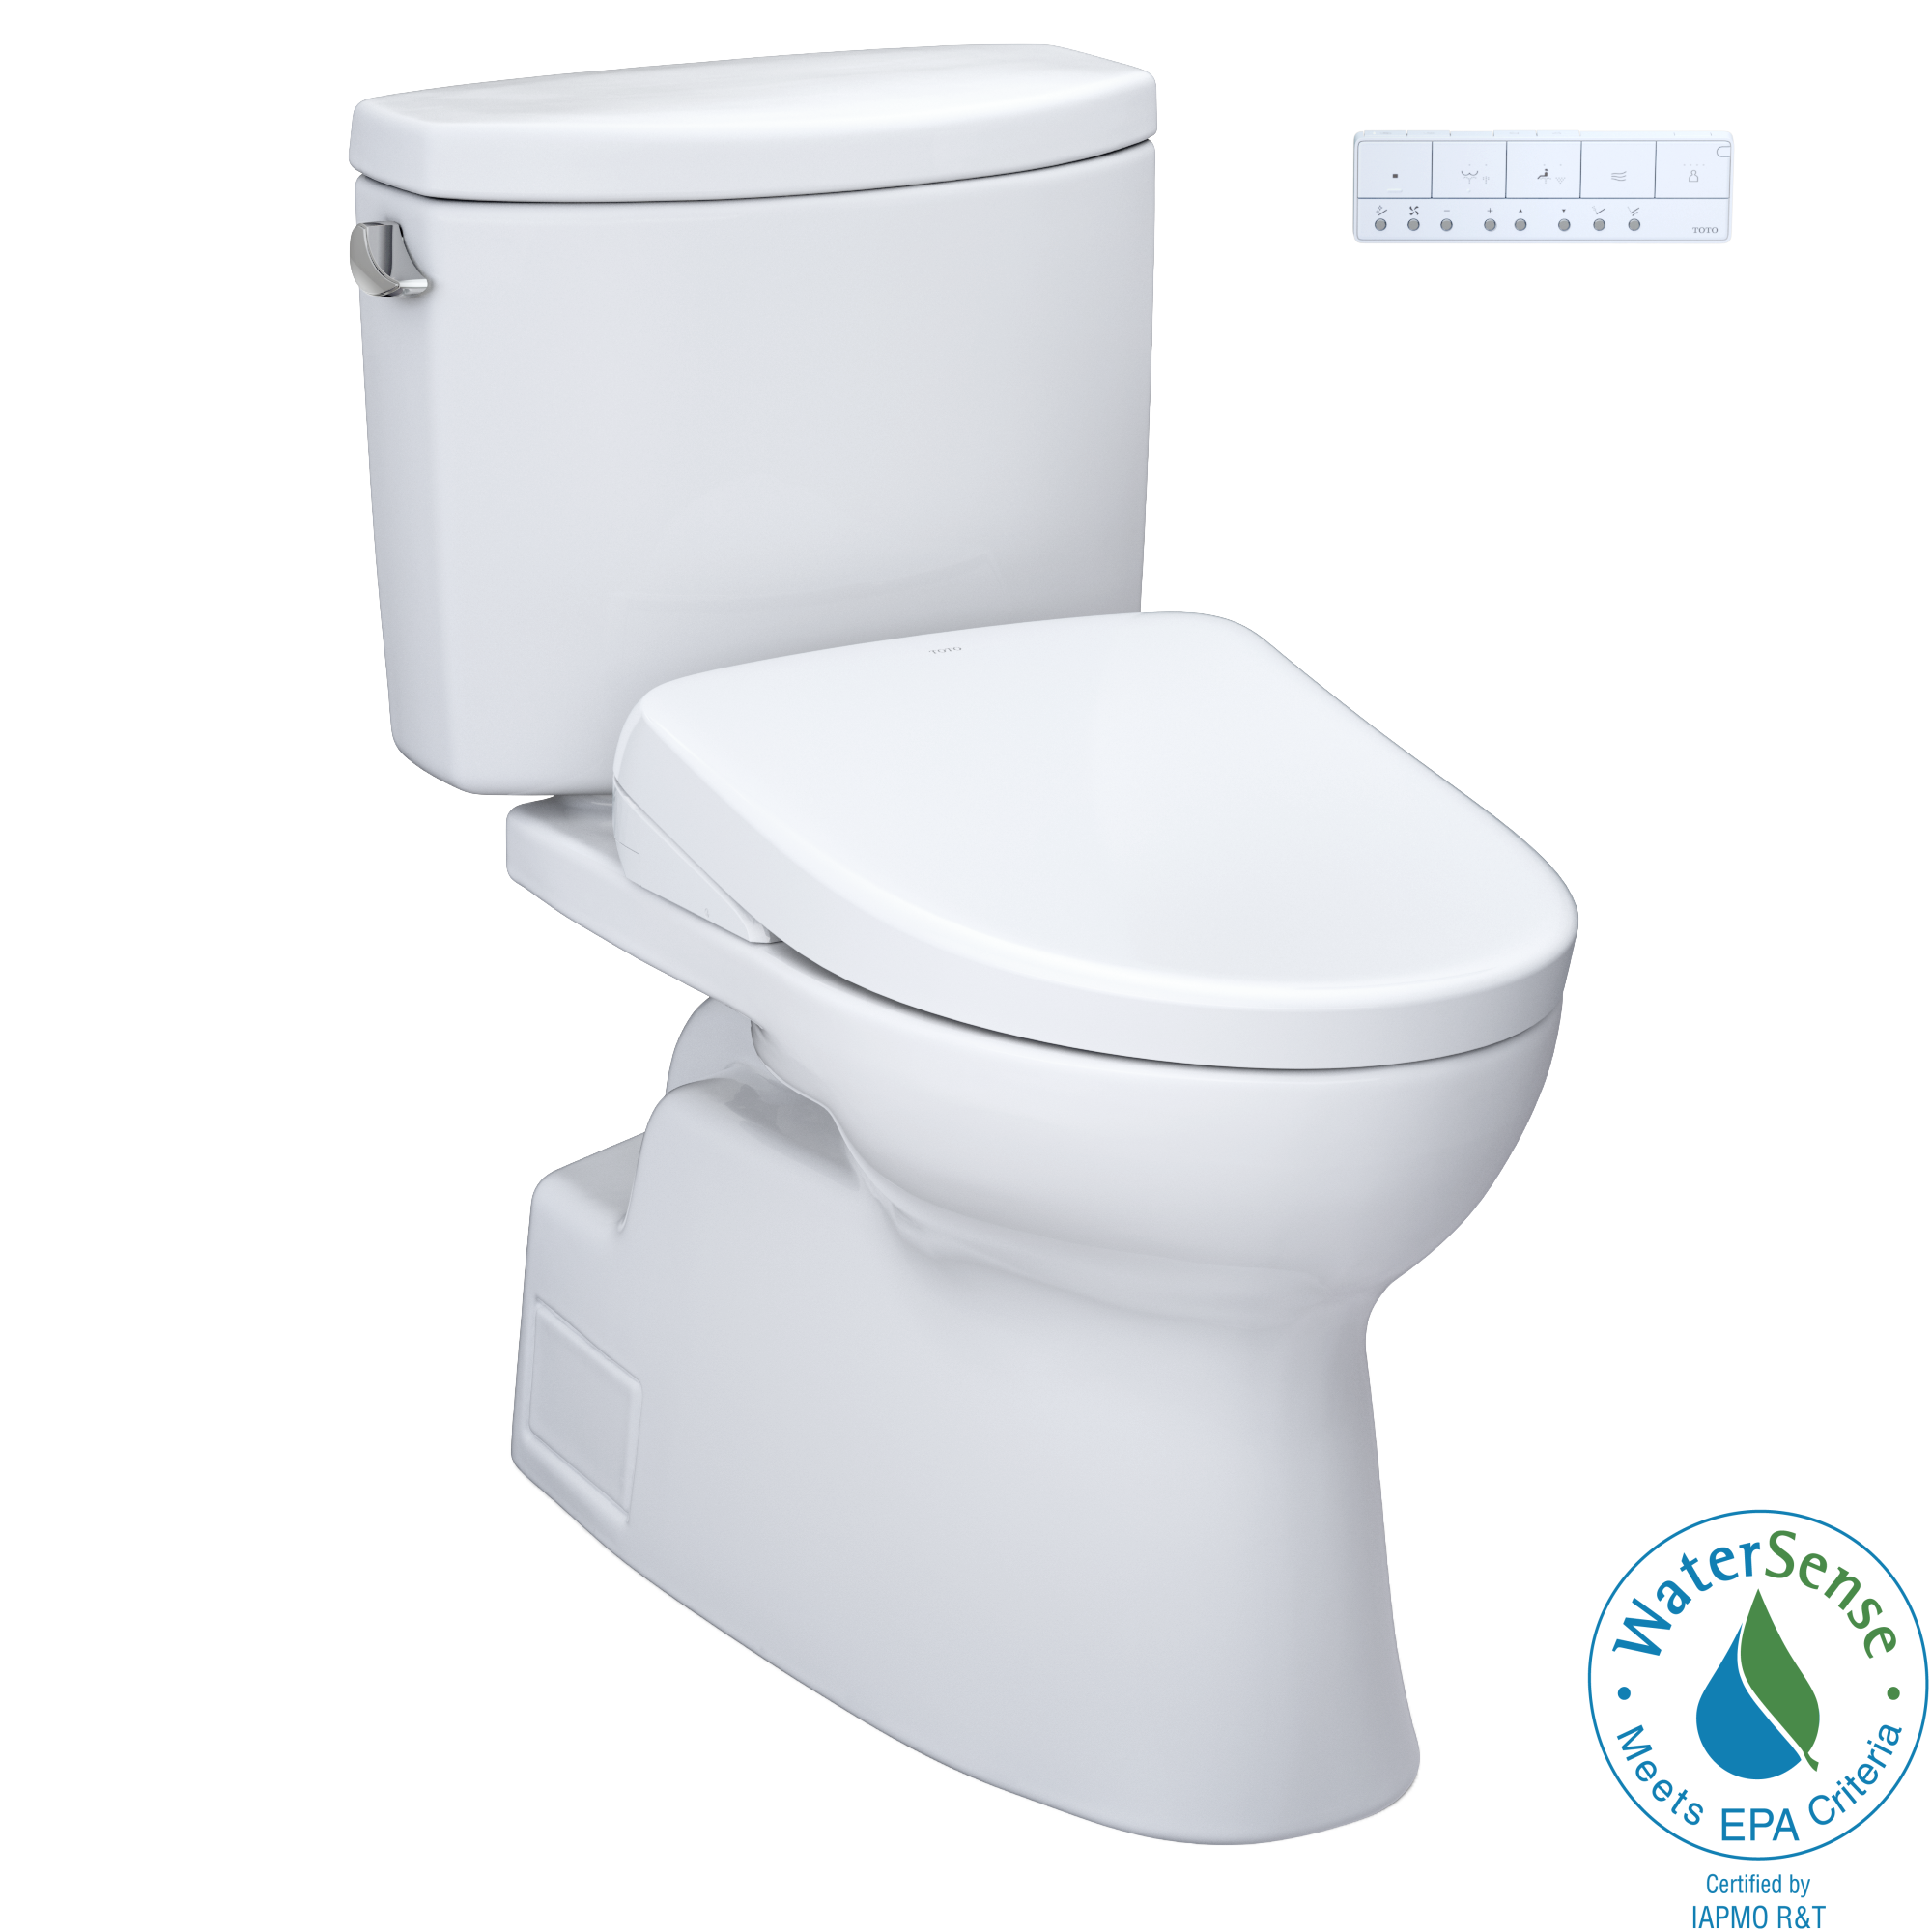 TOTO WASHLET+ Vespin II Two-Piece Elongated 1.28 GPF Toilet and WASHLET+ S7A Contemporary Bidet Seat, Cotton White - MW4744736CEFG#01, MW4744736CEFGA#01